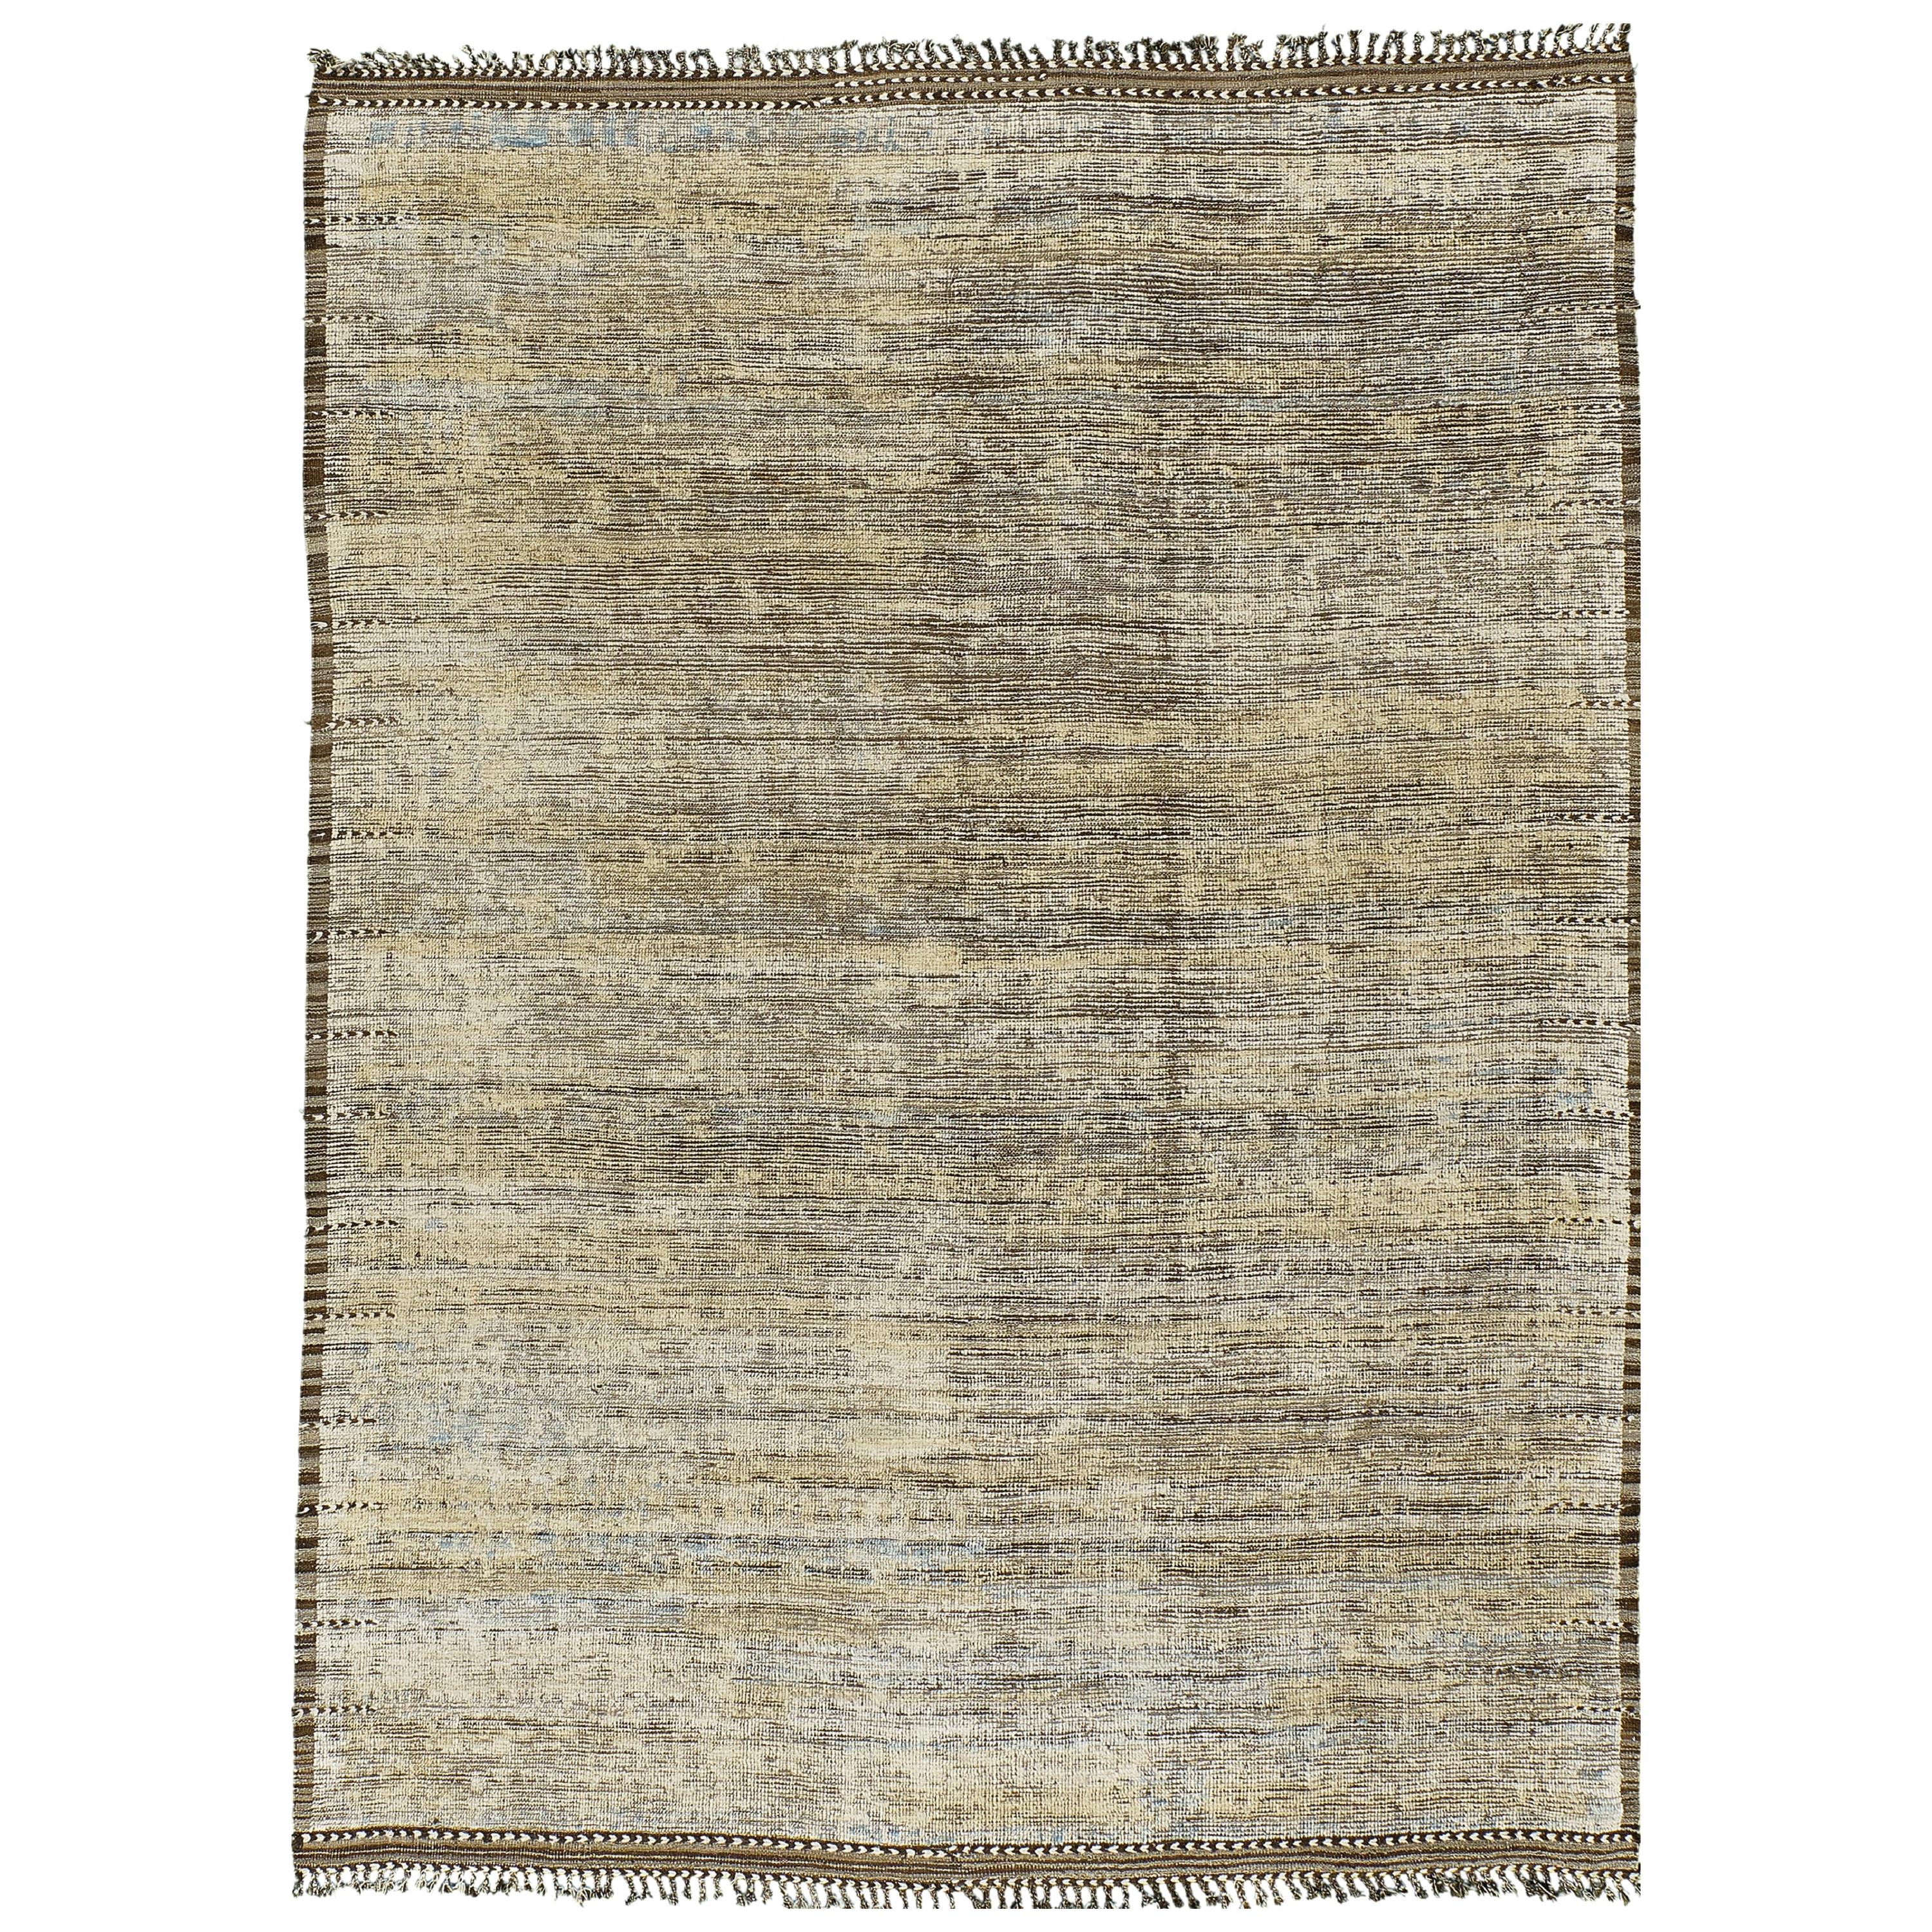 Nazmiyal Collection Earth Tones Modern Distressed Rug 9 ft 10 in x 13 ft 8 in